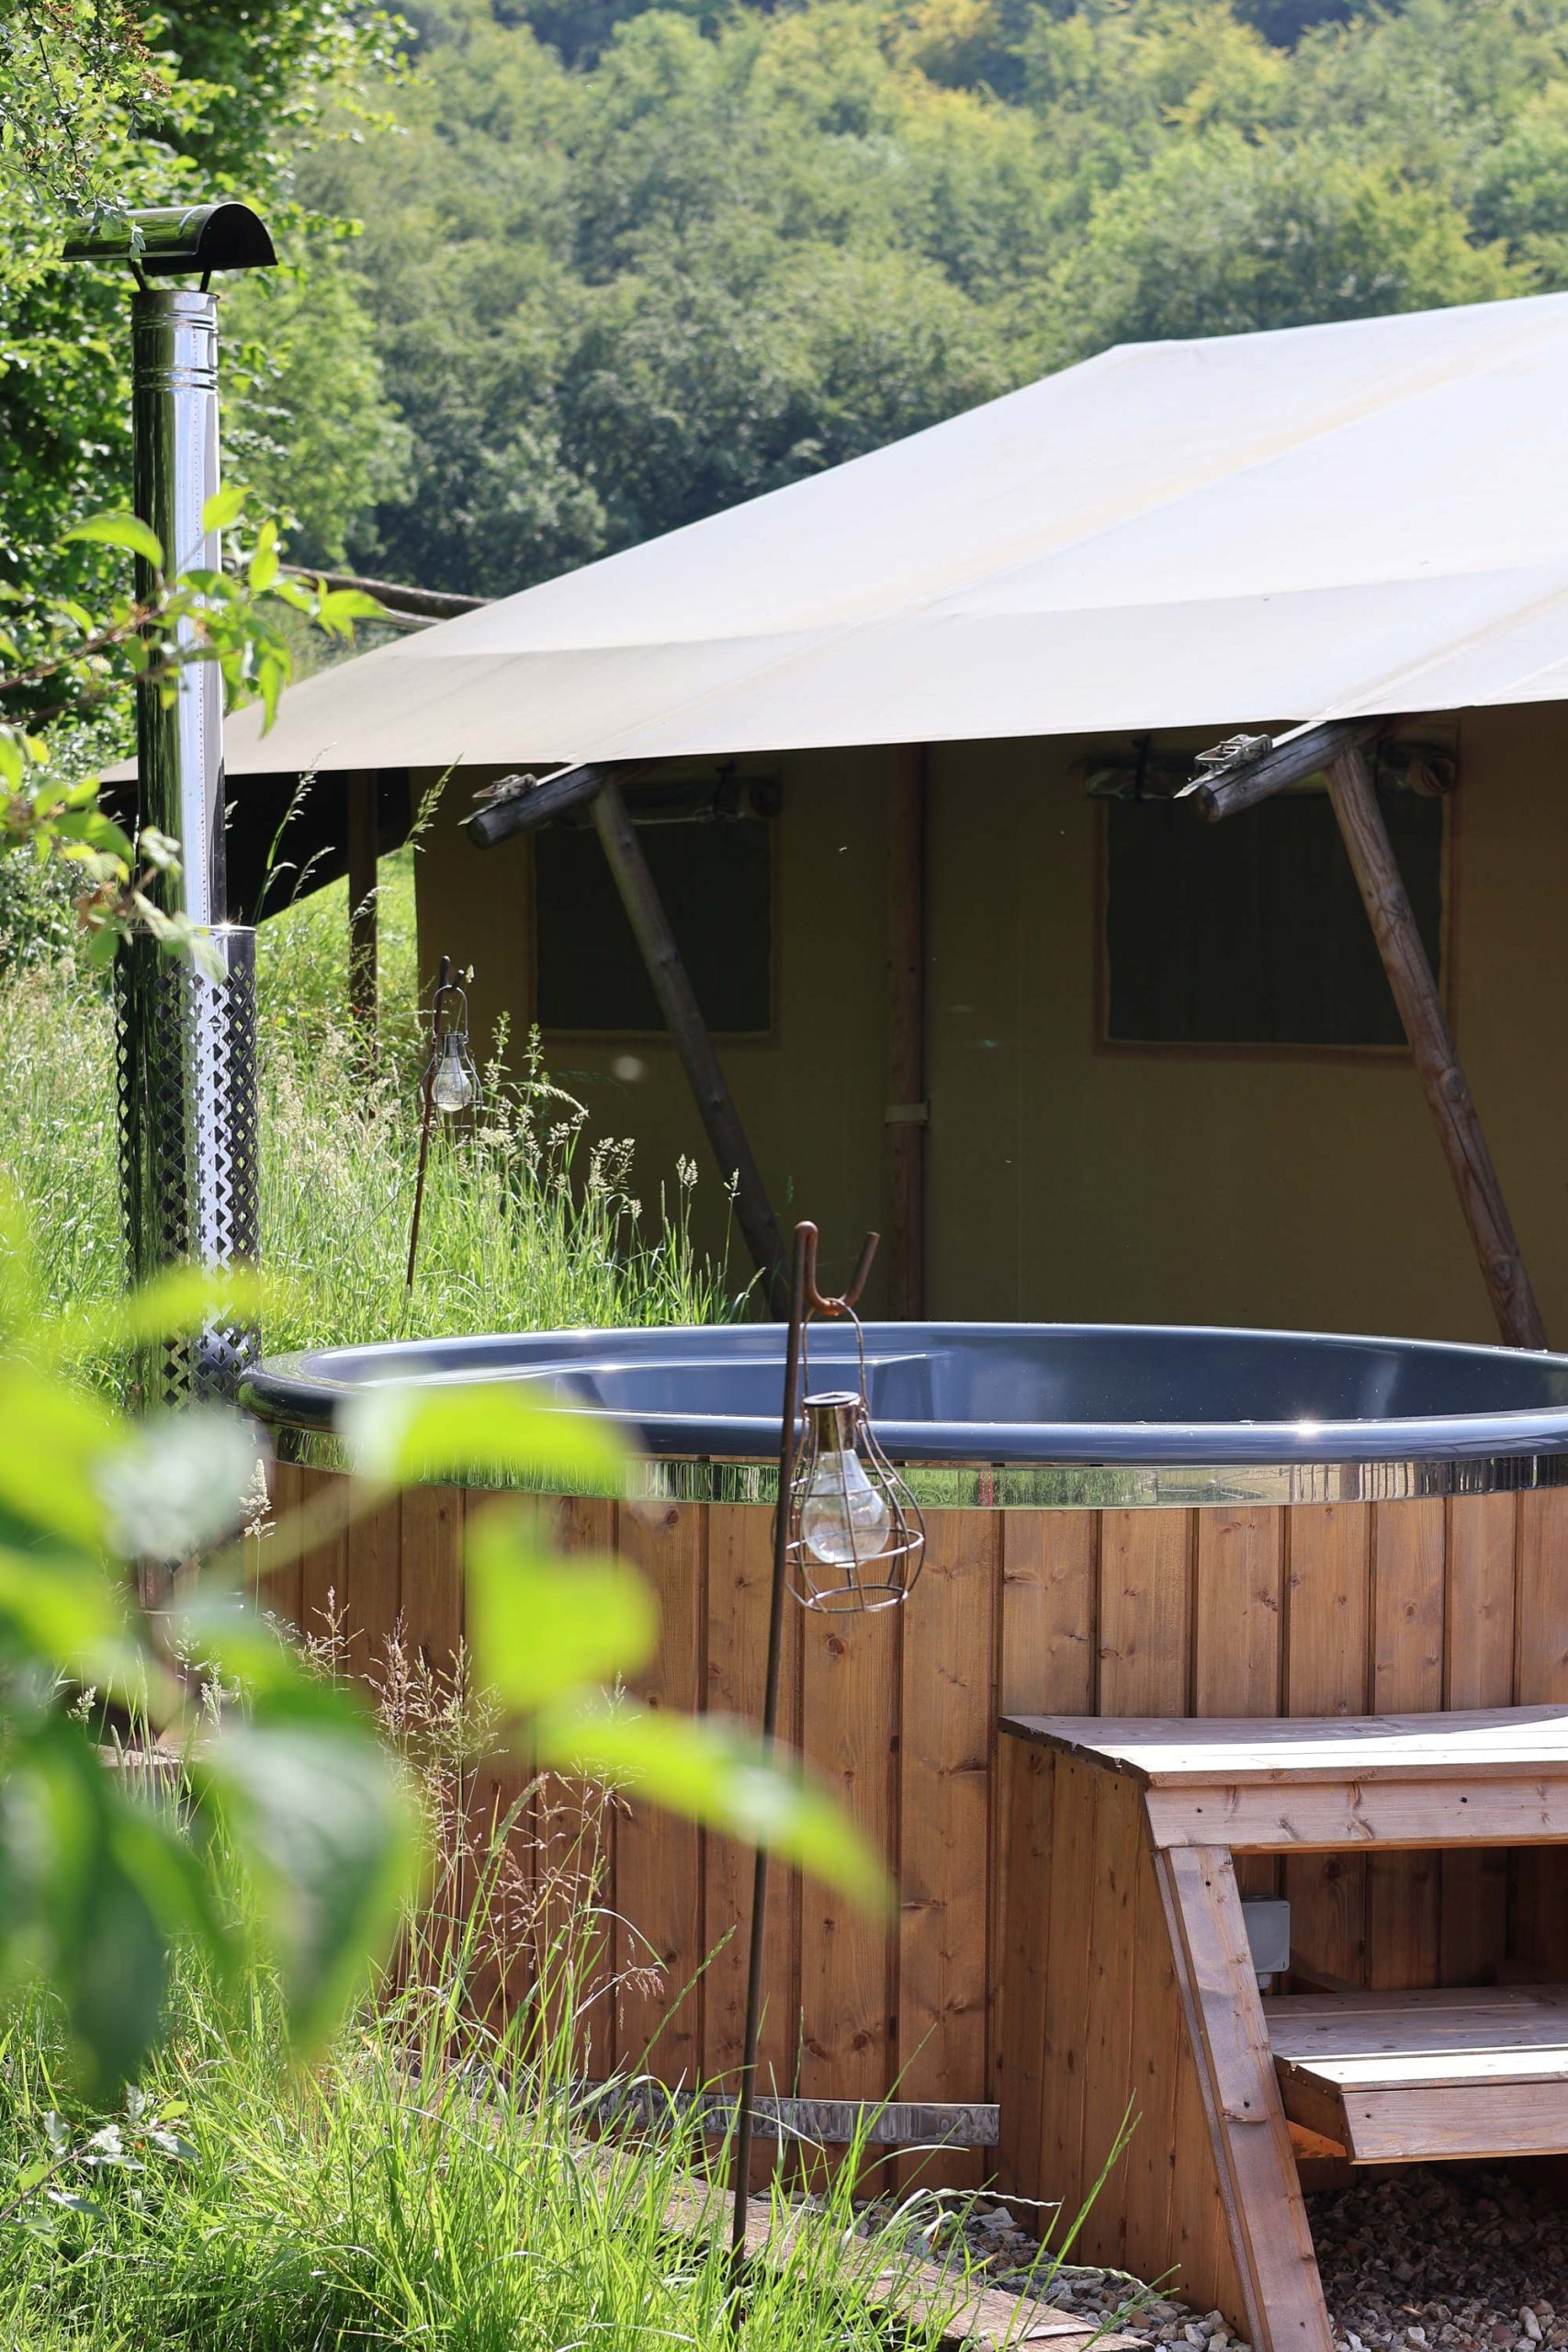 Eco hot tub at Loose Reins in Dorset